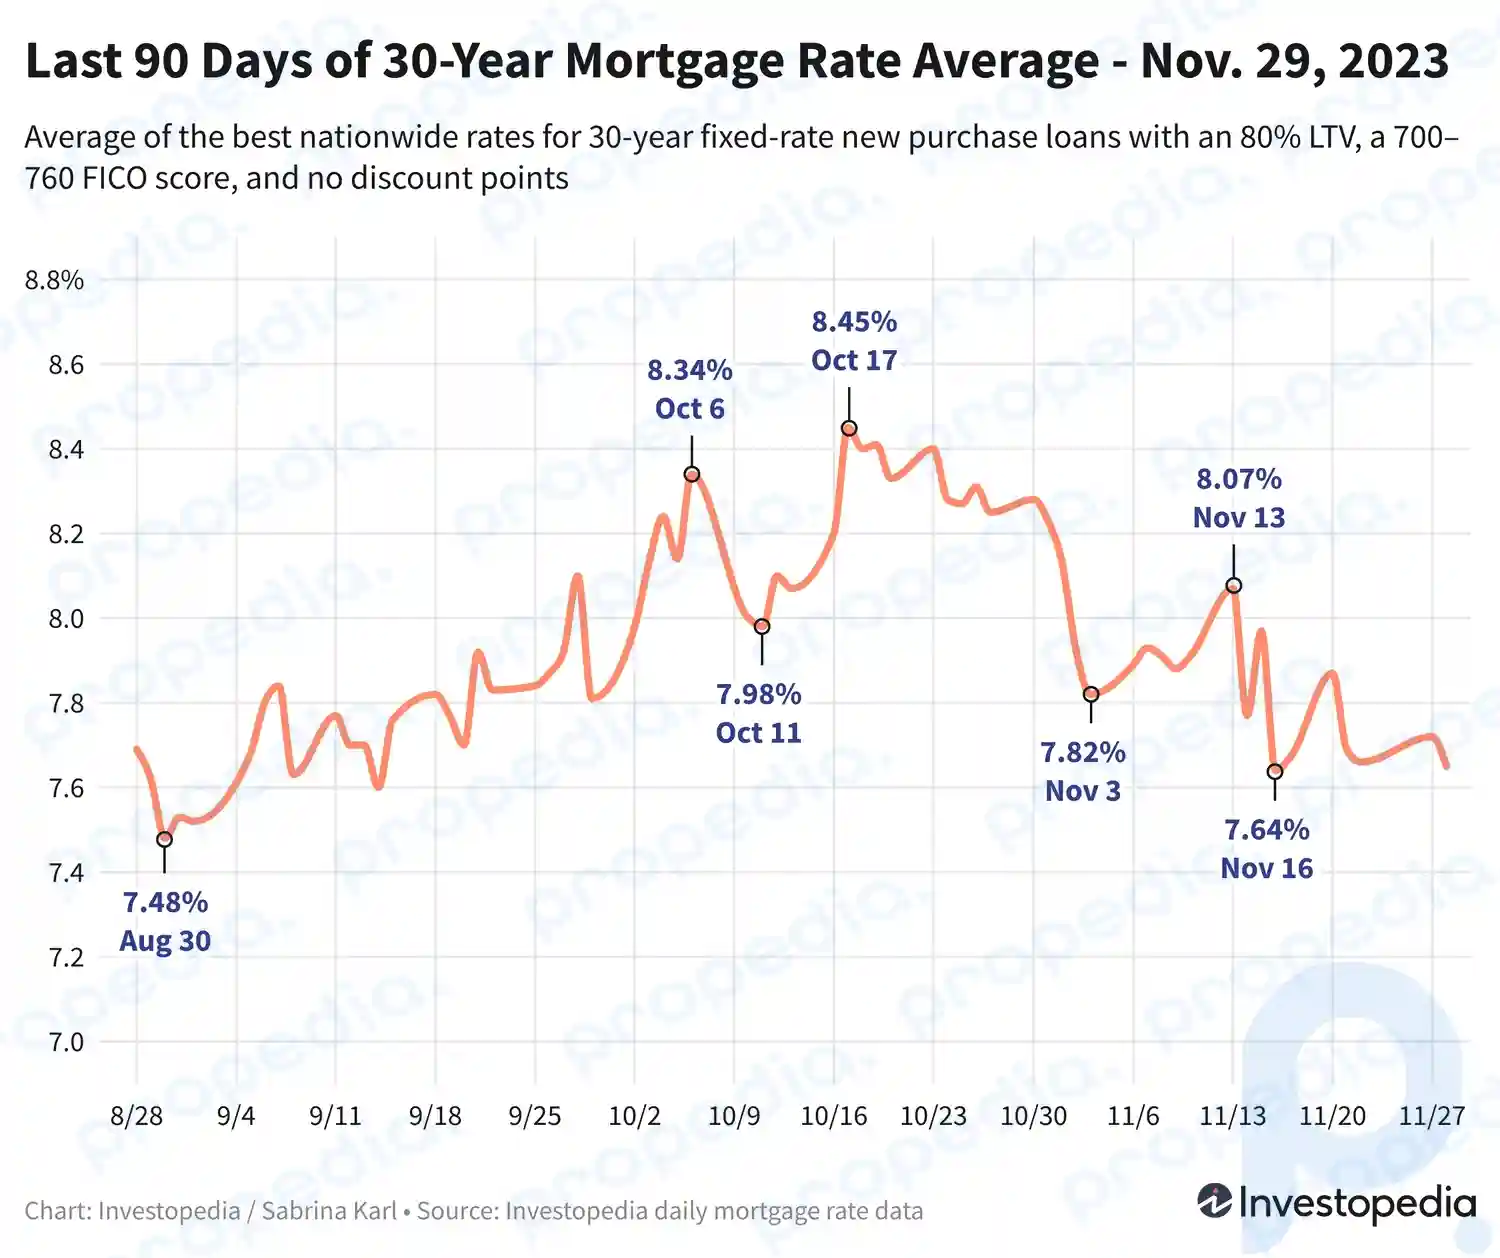 Mortgage Rates Drop Again, Sinking 30Year Average Almost to Its 2